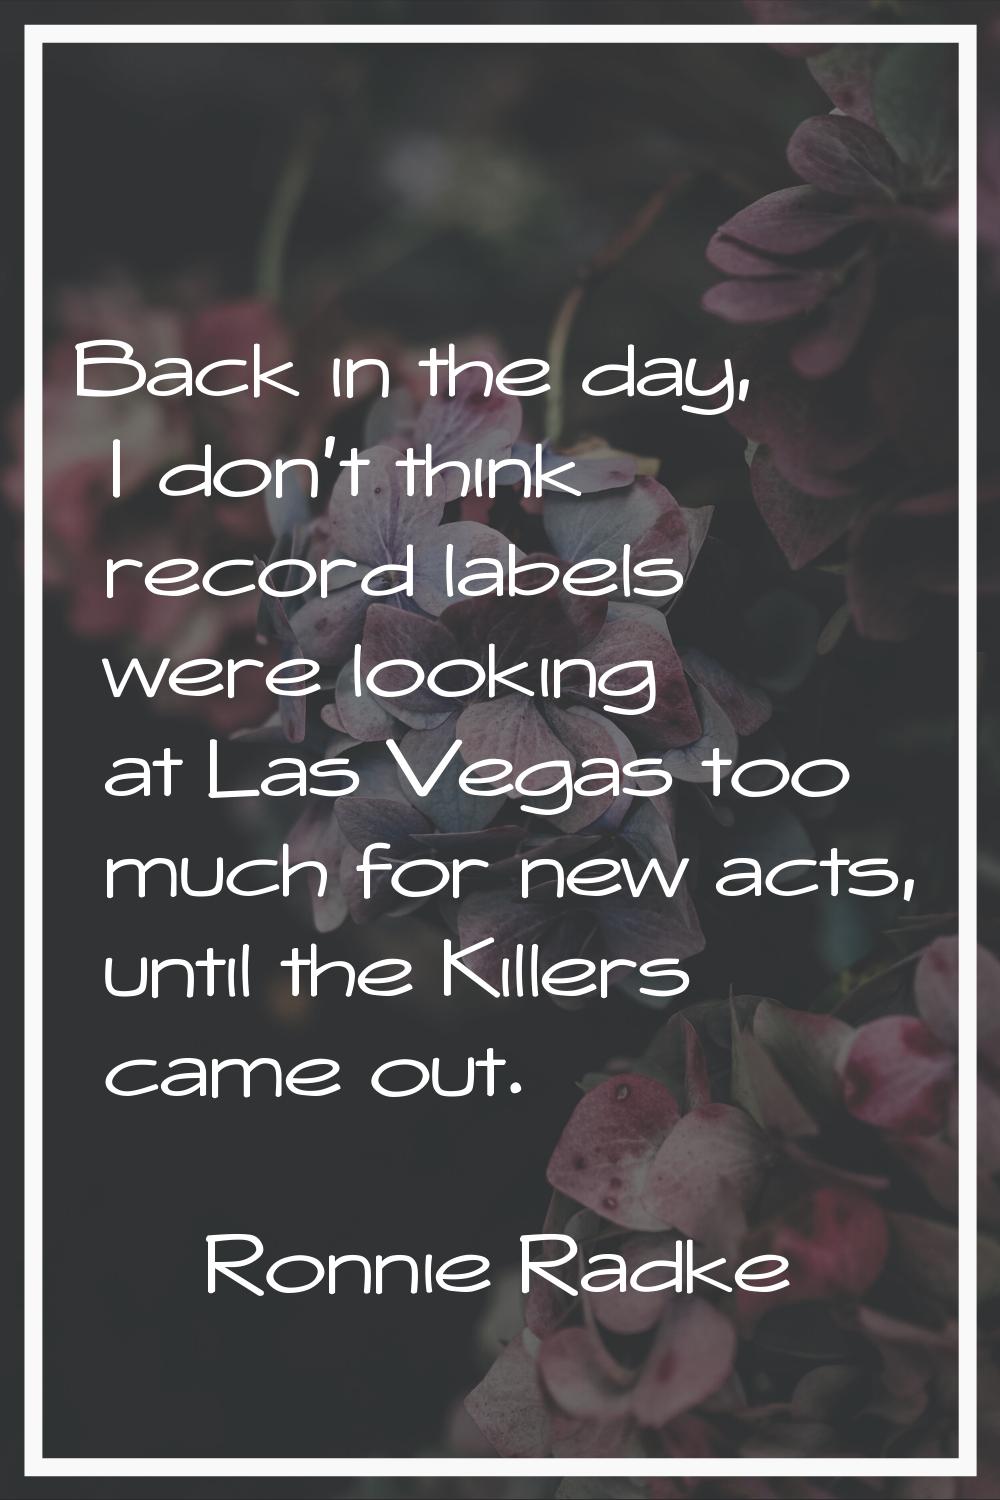 Back in the day, I don't think record labels were looking at Las Vegas too much for new acts, until